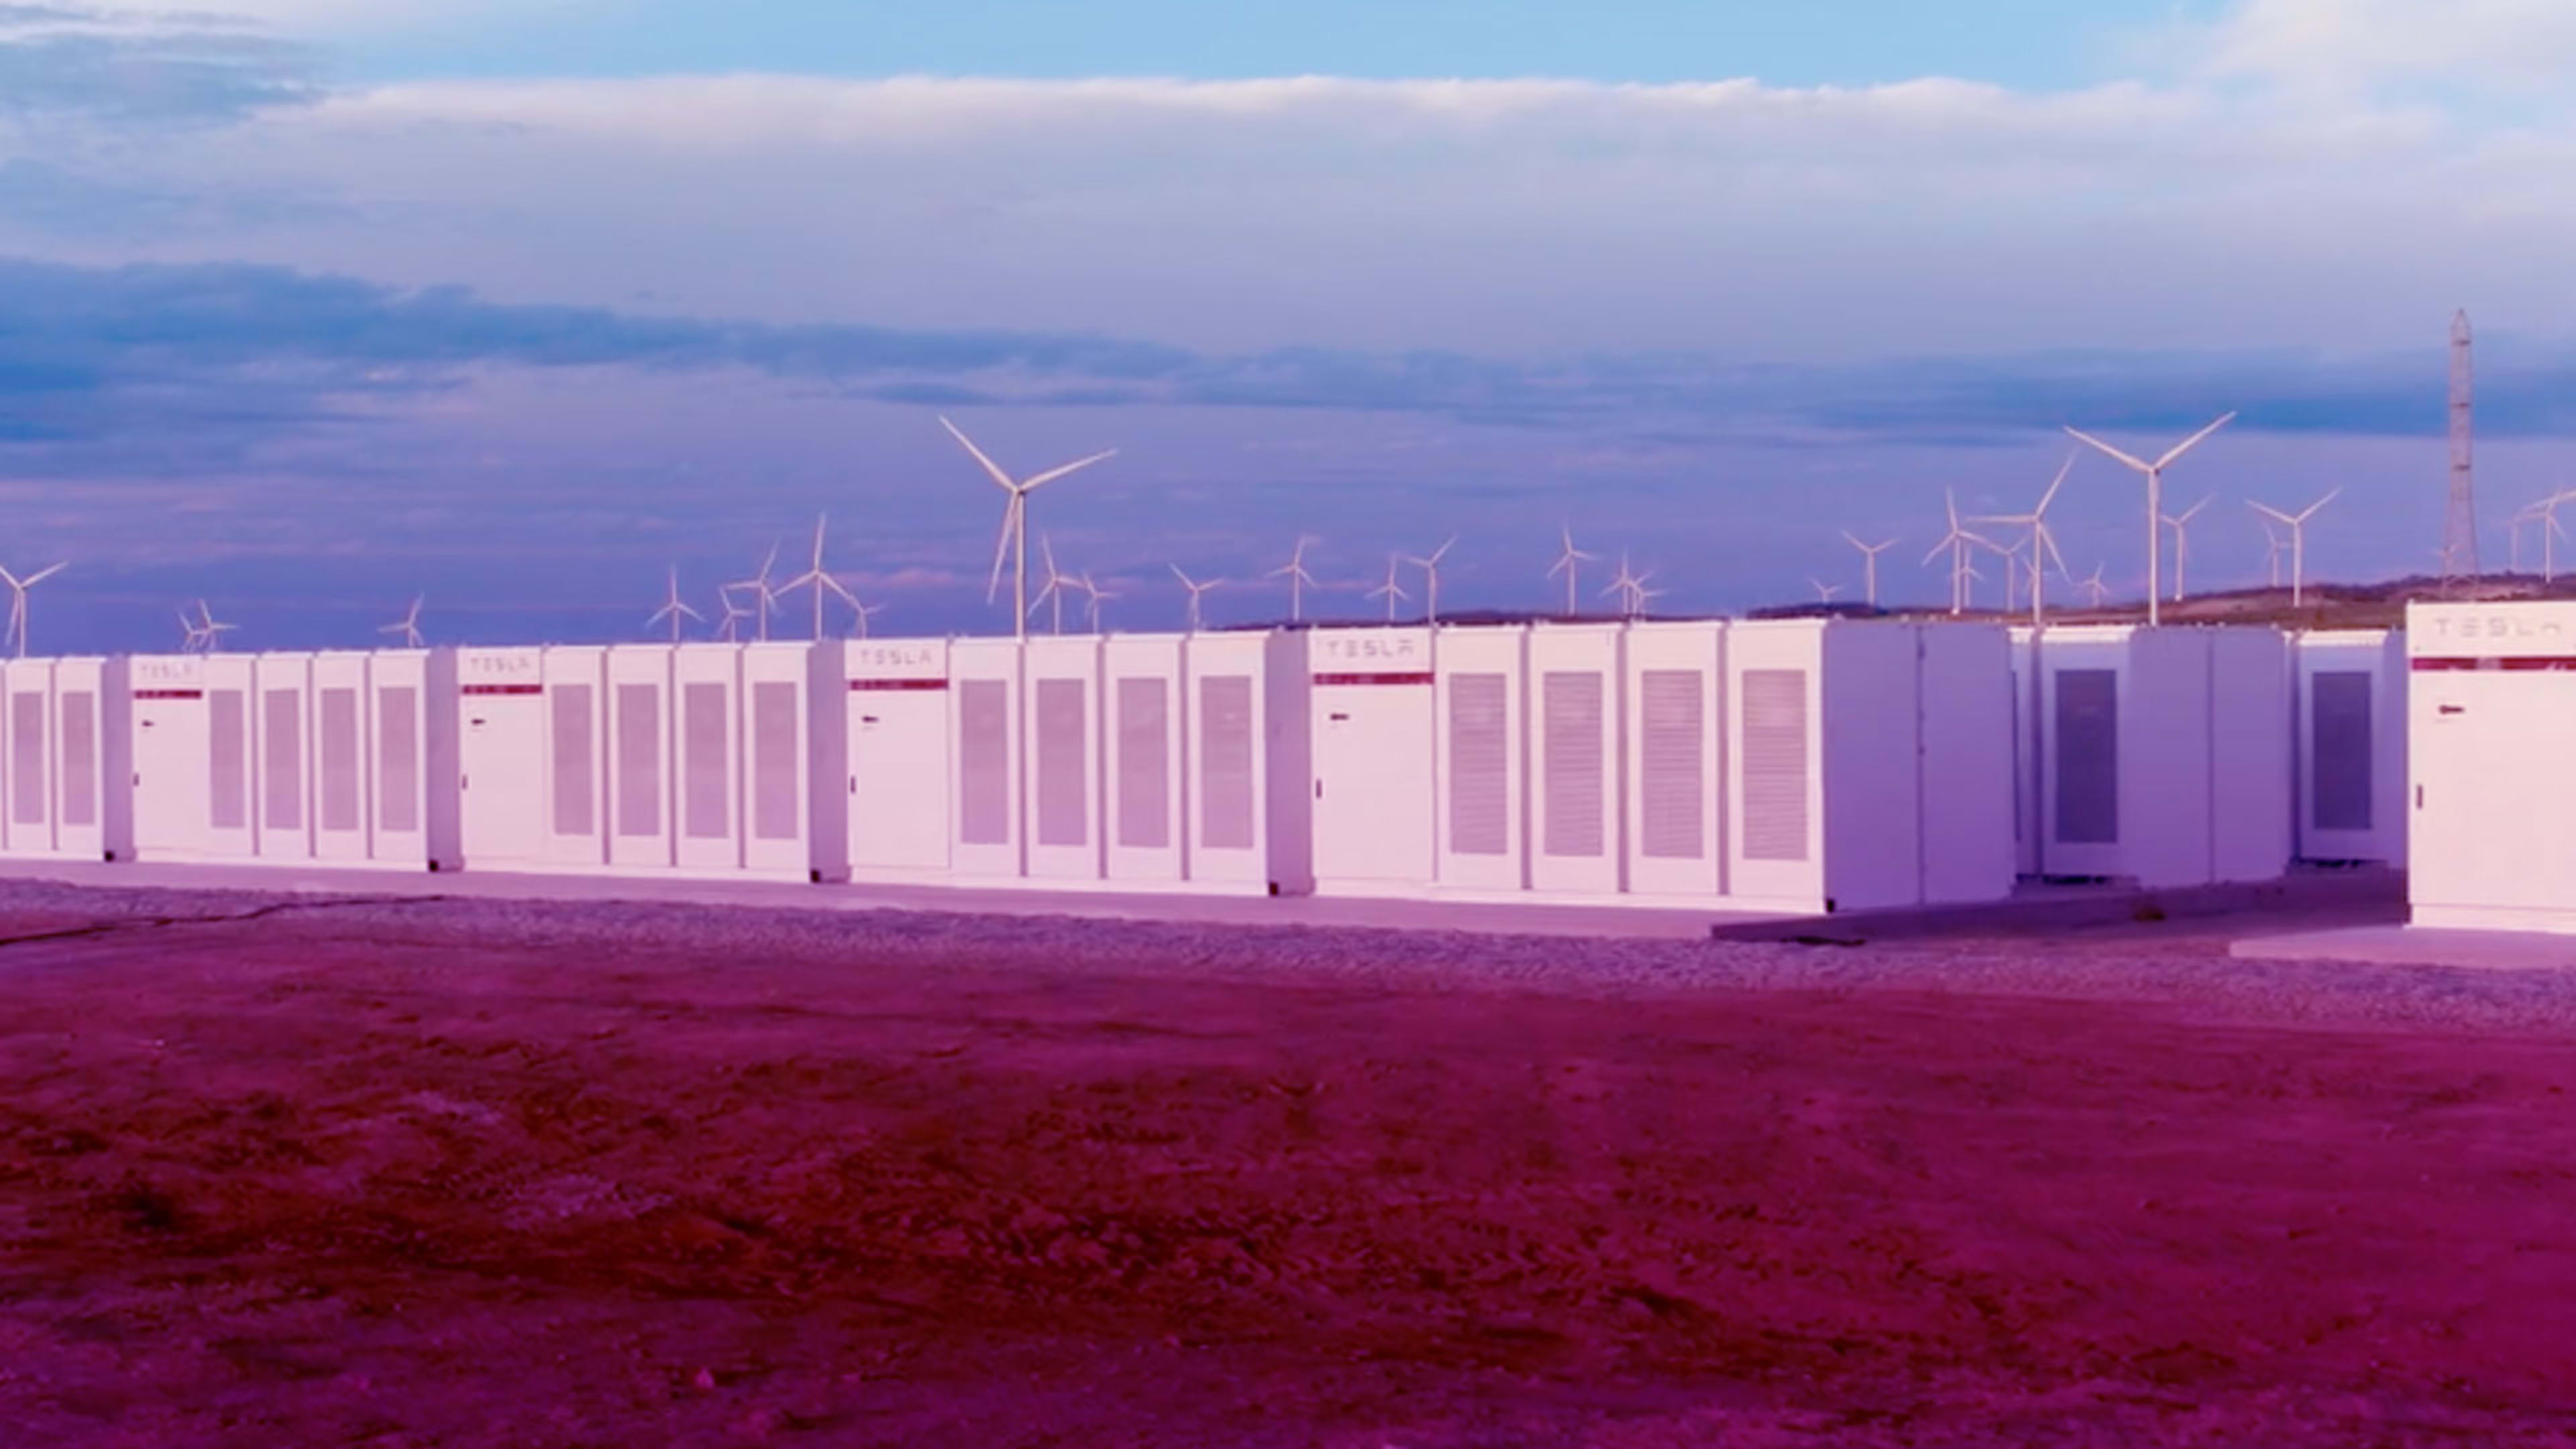 Elon Musk’s massive battery is up and running in South Australia